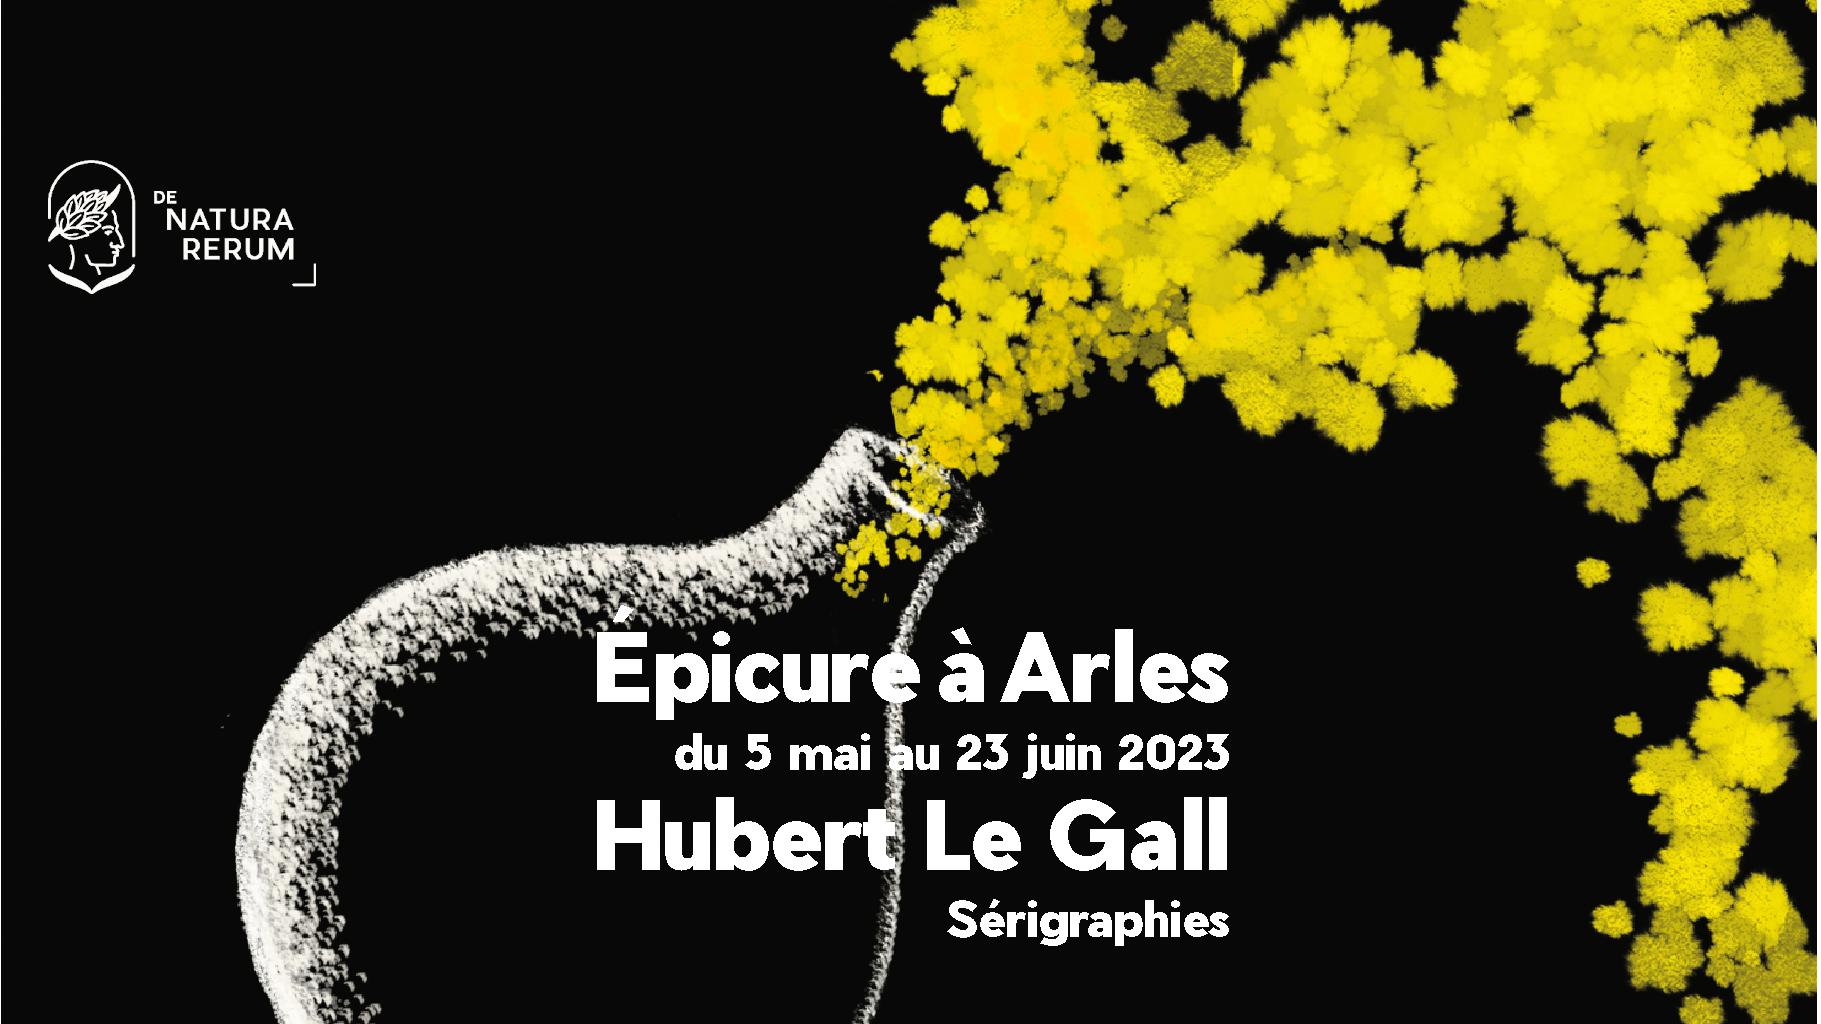 Epicure in Arles, Hubert Le Gall, serigraphies, may and june 2023